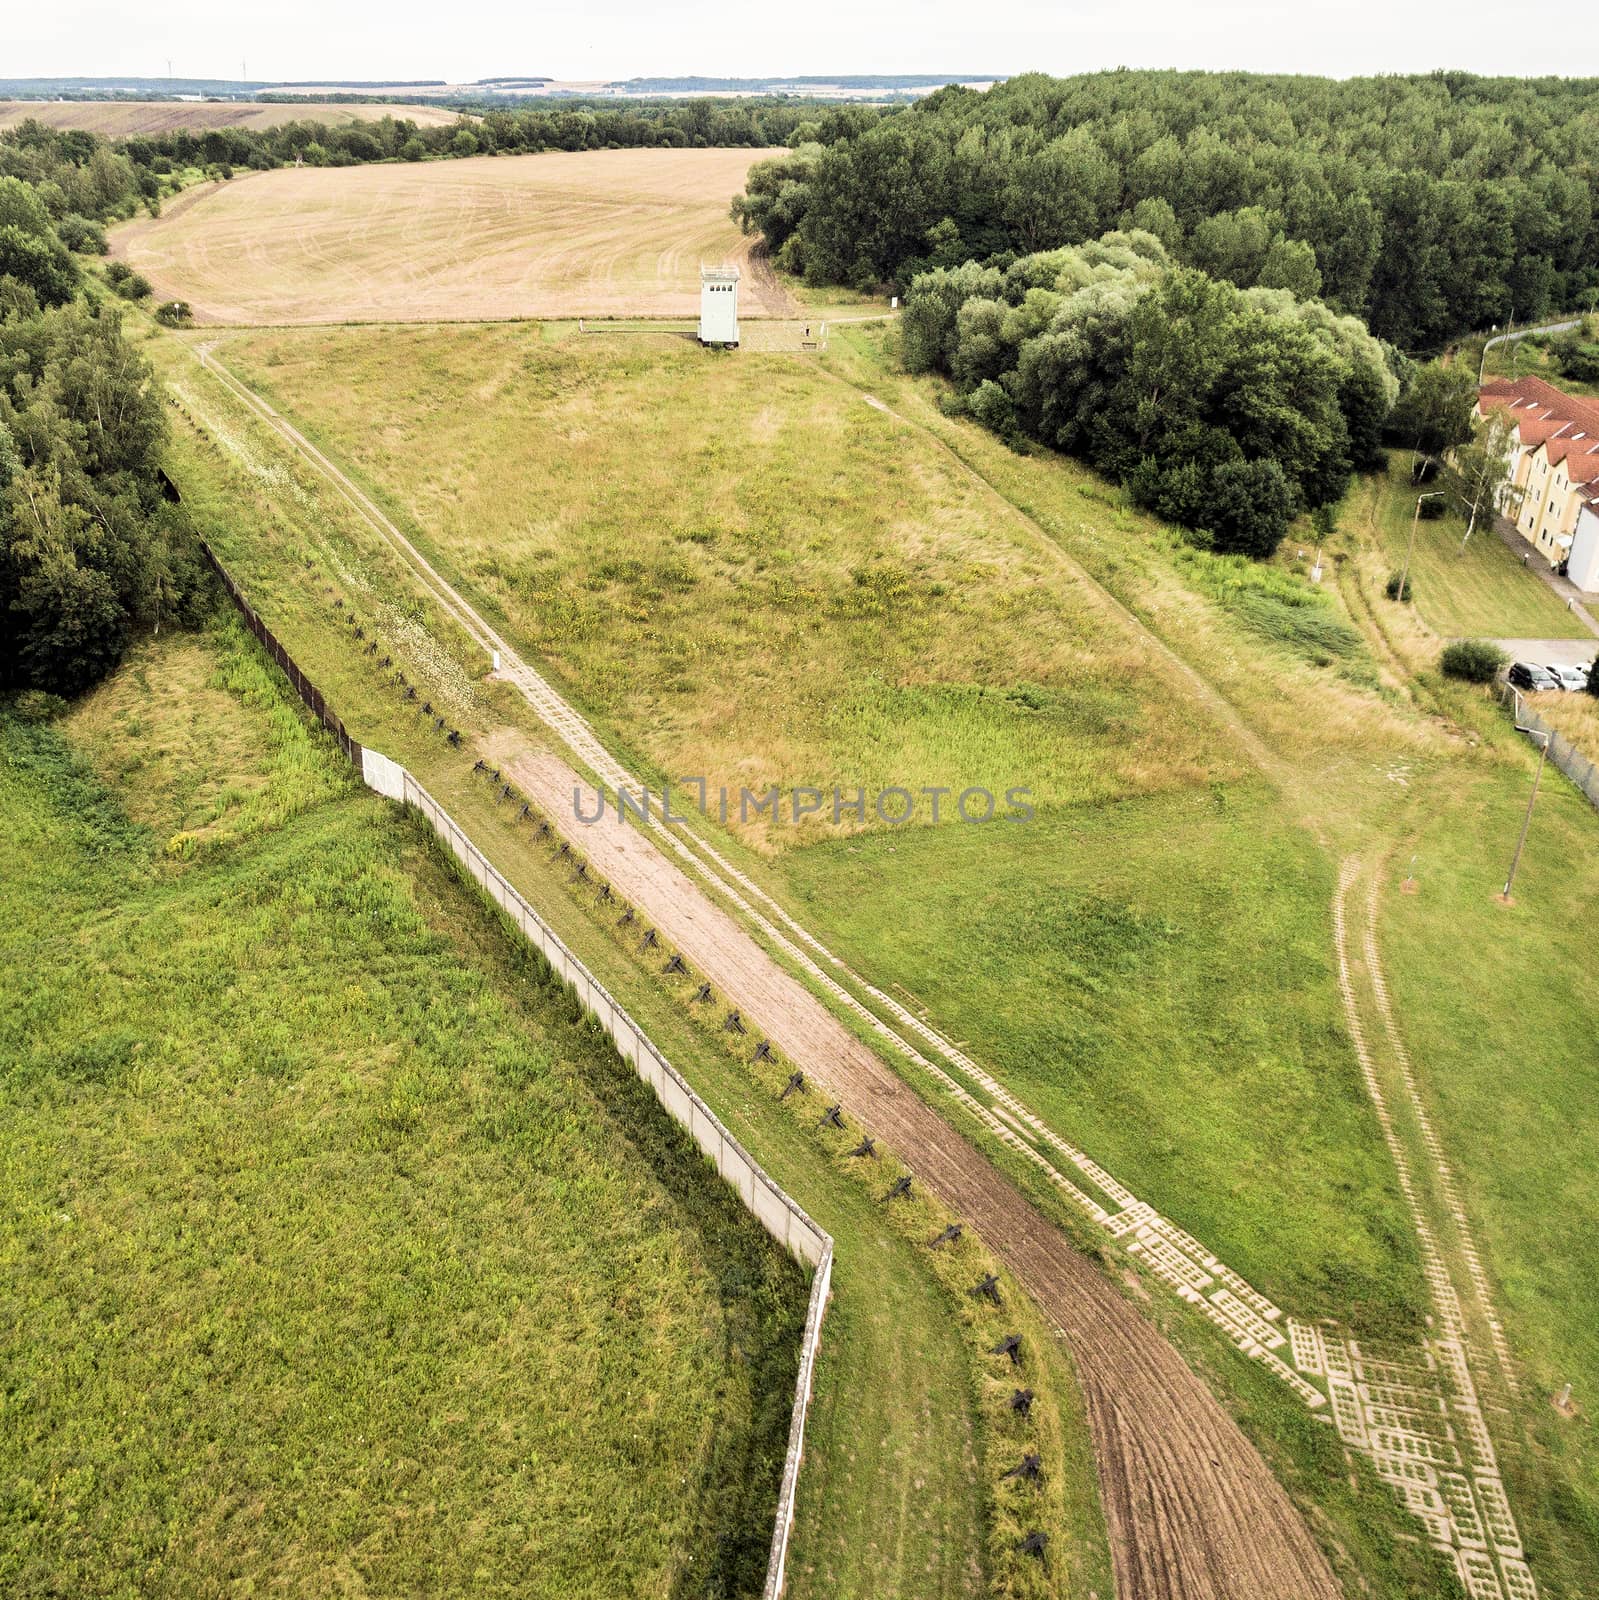 The former border area between West Germany and the GDR, open-air exhibition at Hötensleben, aerial photo taken at an angle, made with drone